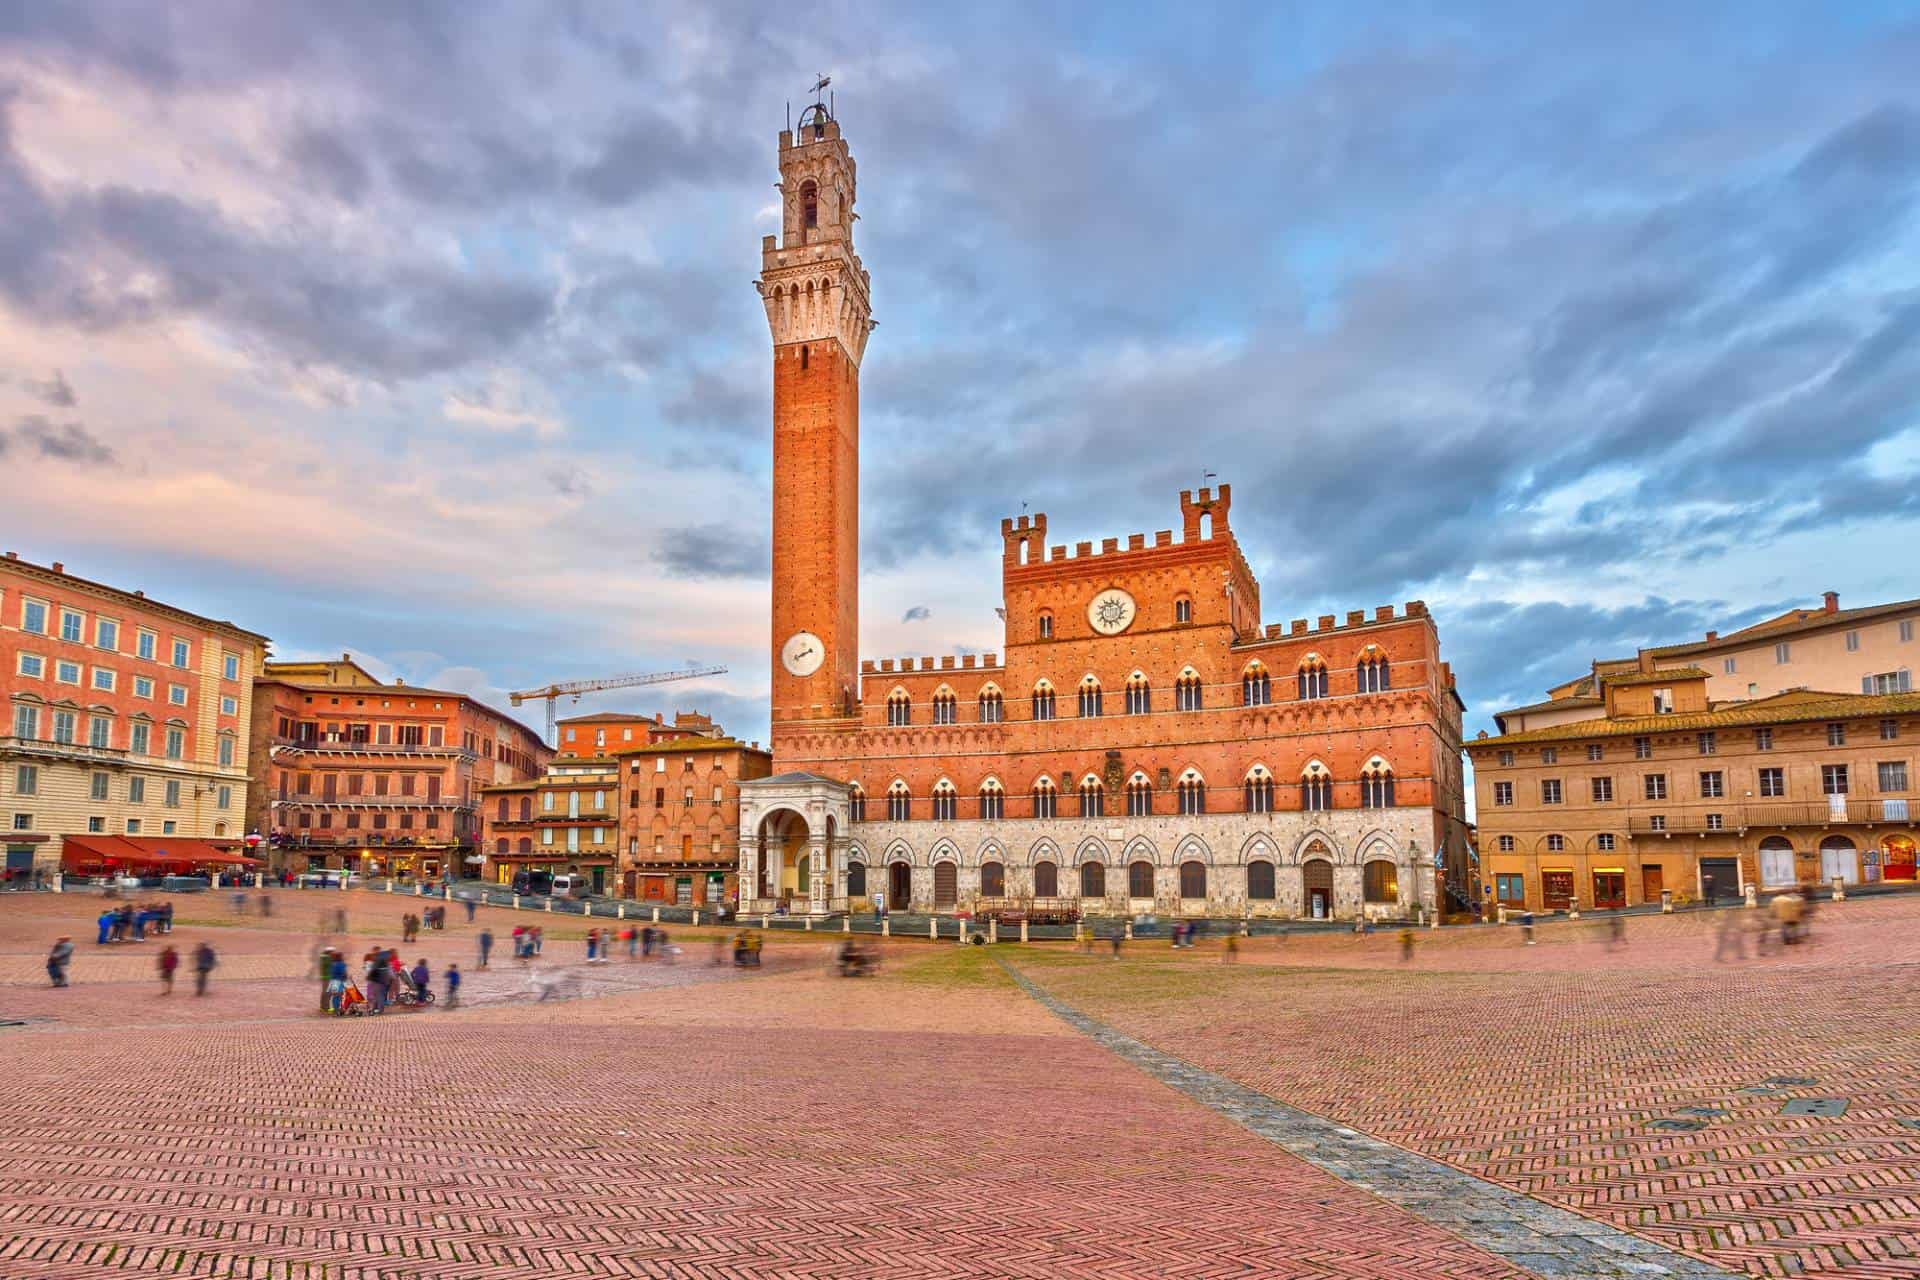 The chase scene in the James Bond film Quantum of Solace was shot here in Piazza del Campo, Siena, Italy.